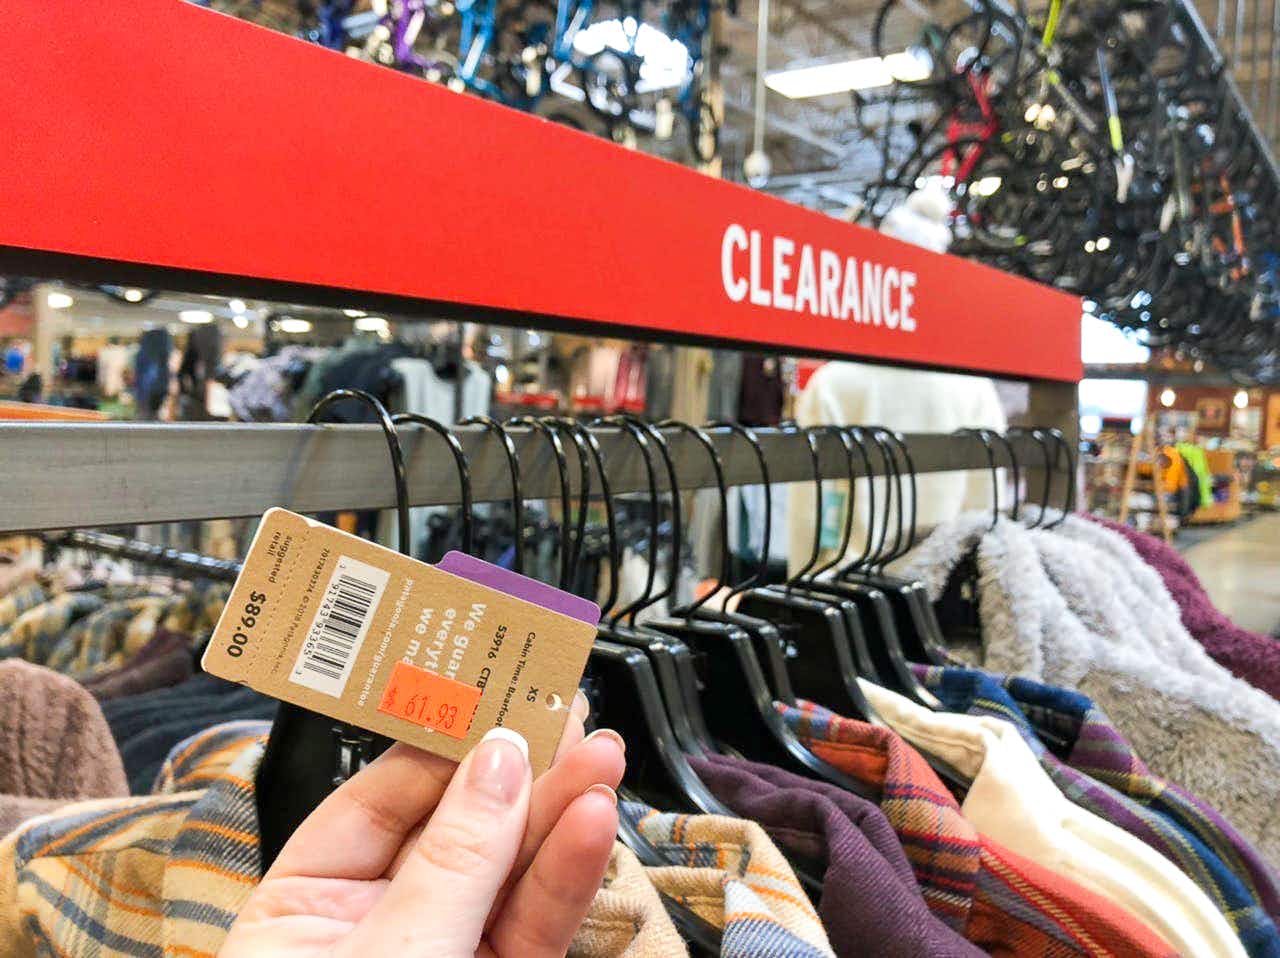 The After Christmas Clearance Schedules to Memorize for 90% Off